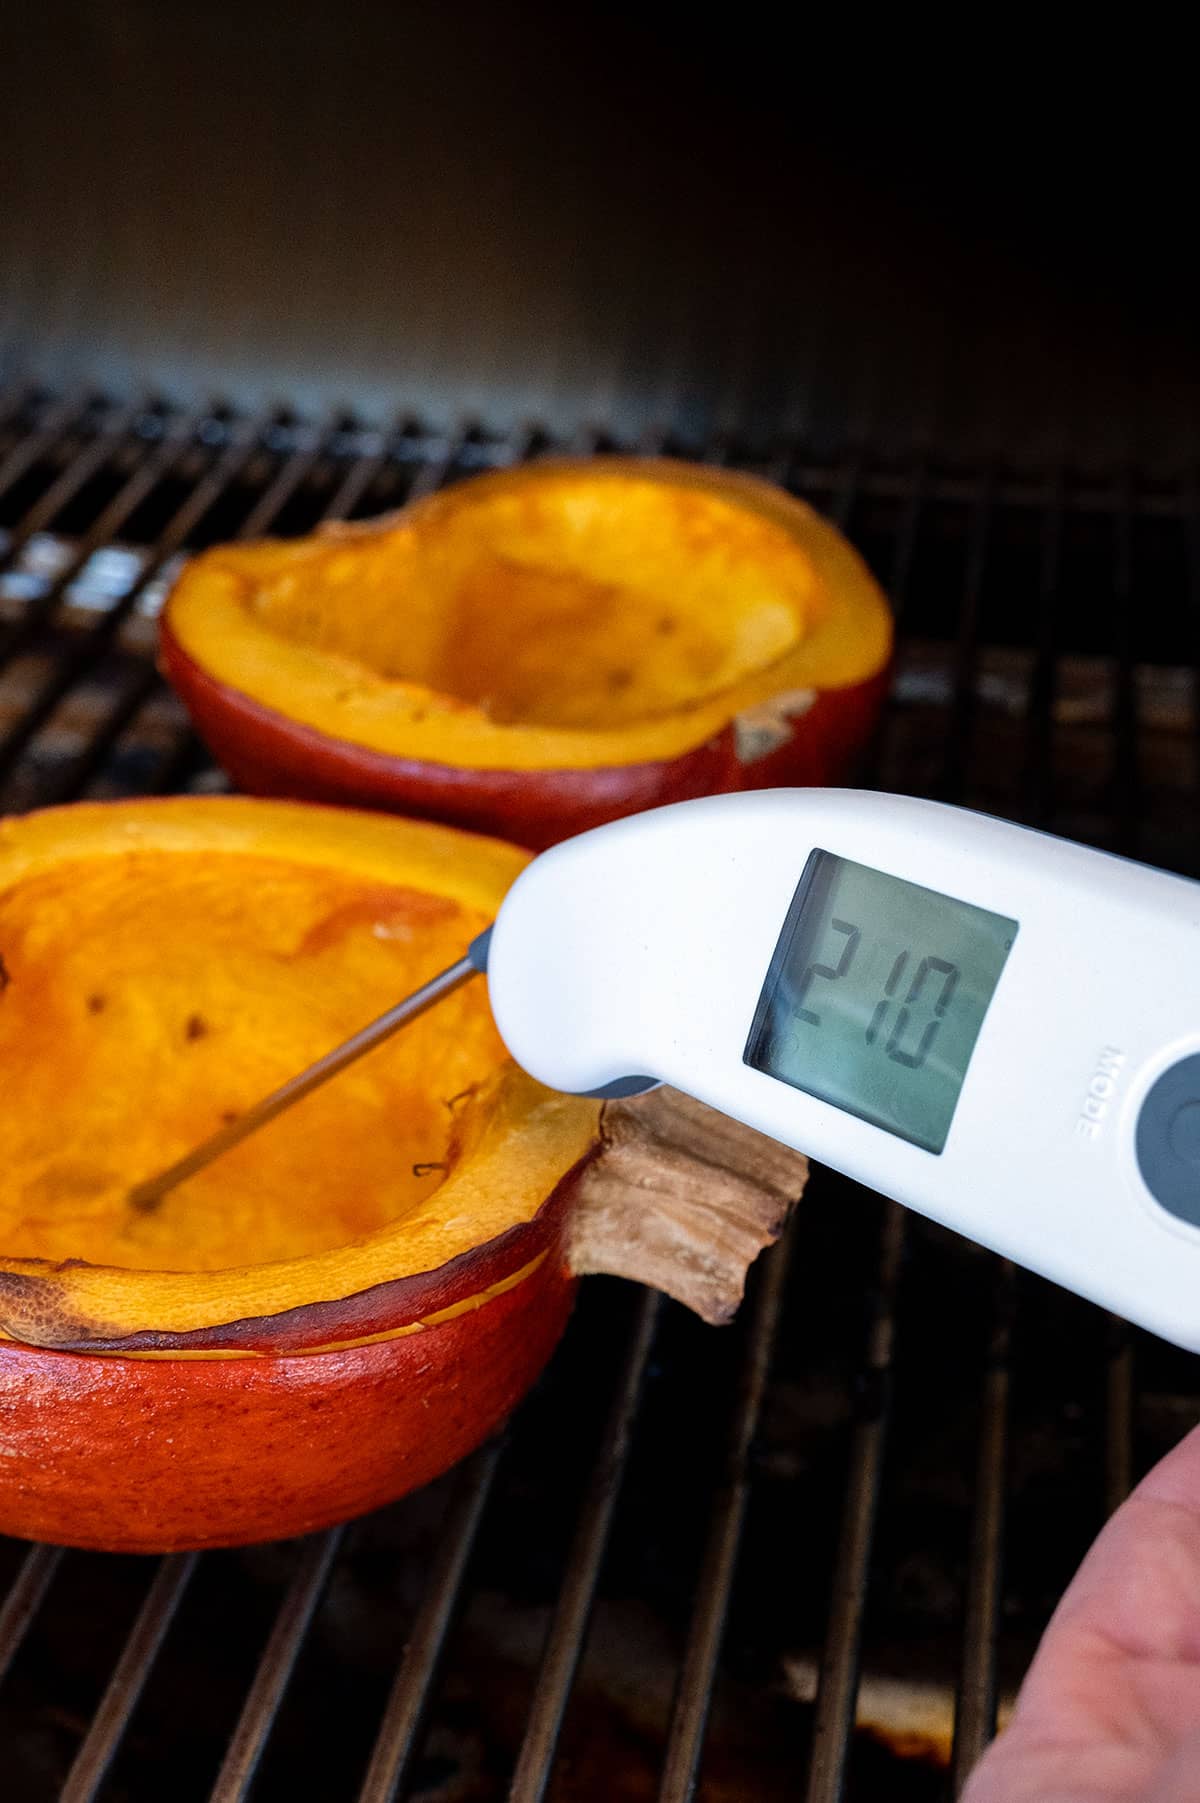 Digital thermometer showing internal temperature of pumpkin at 210F degrees.